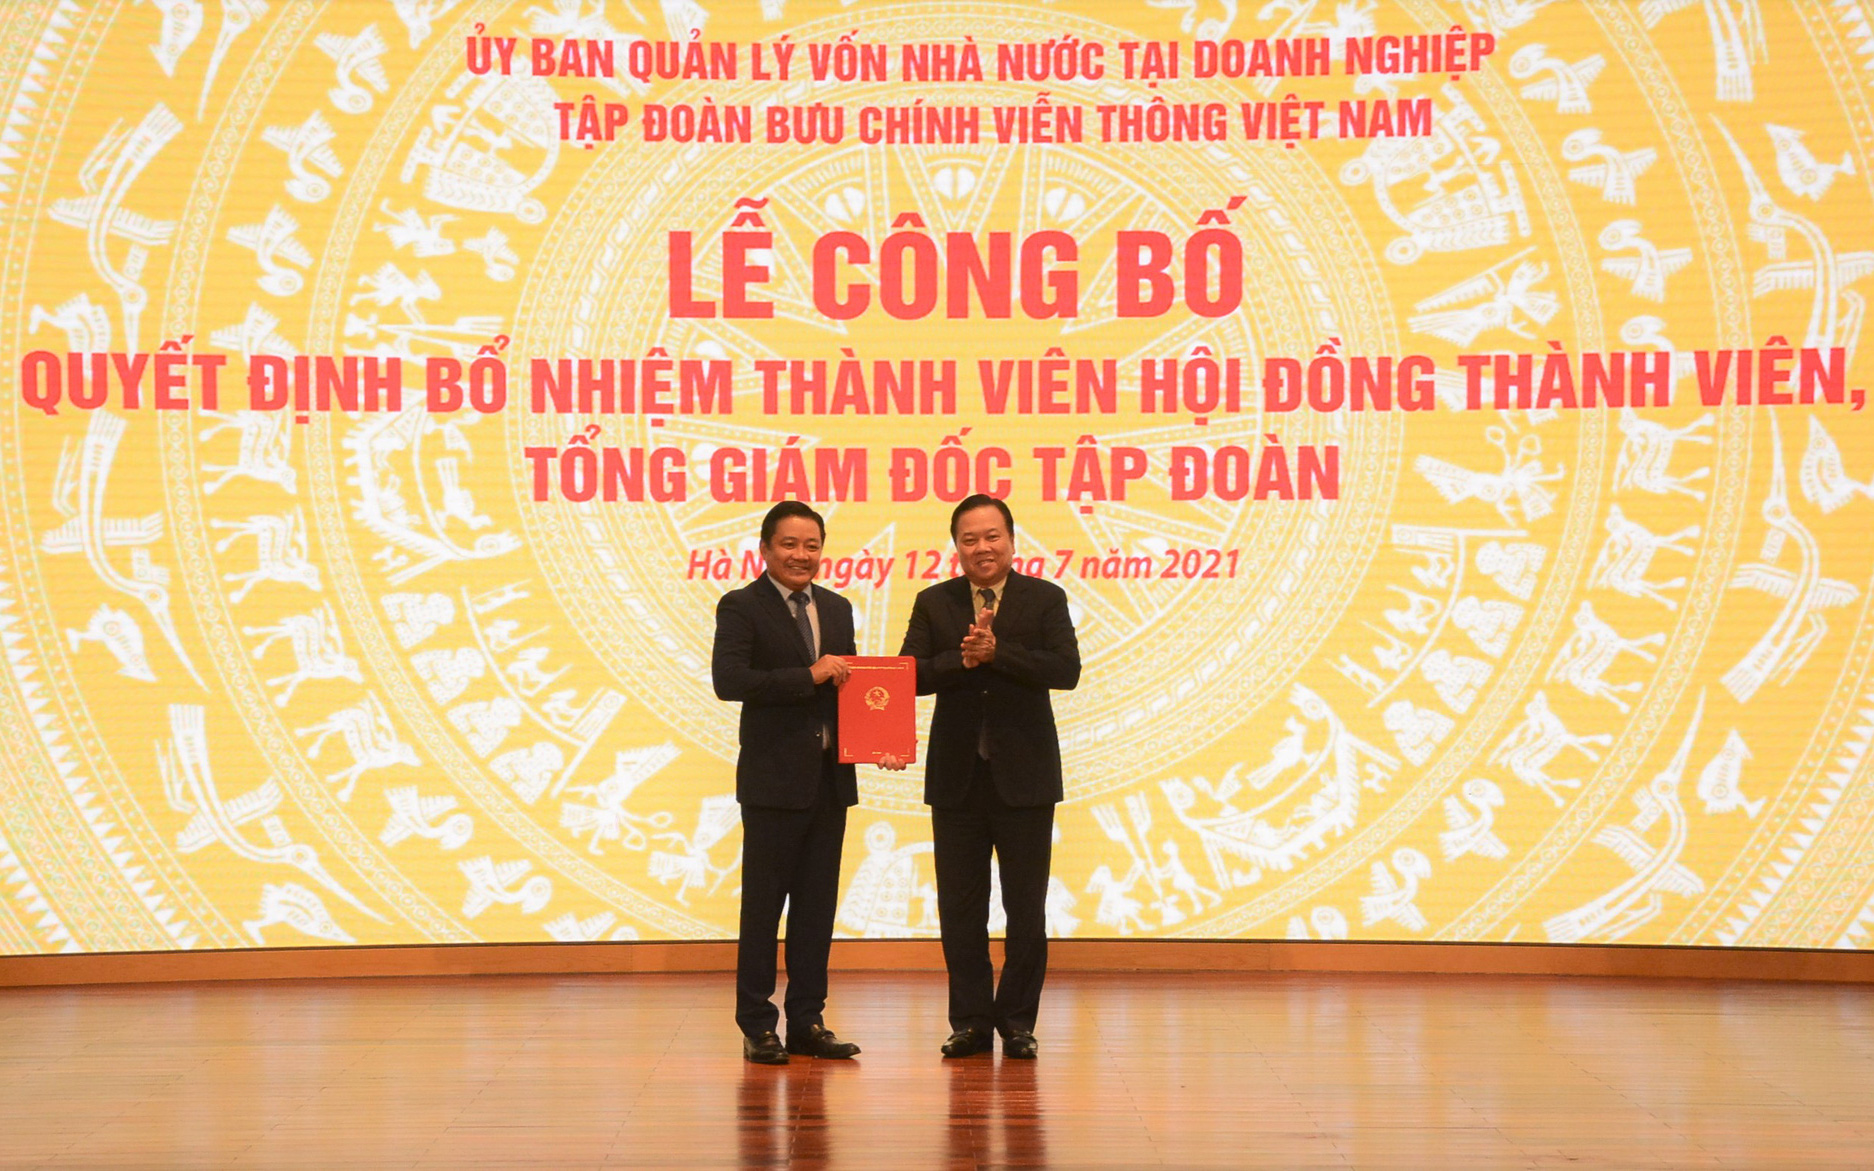 Mr. Huynh Quang Liem was appointed General Director of VNPT